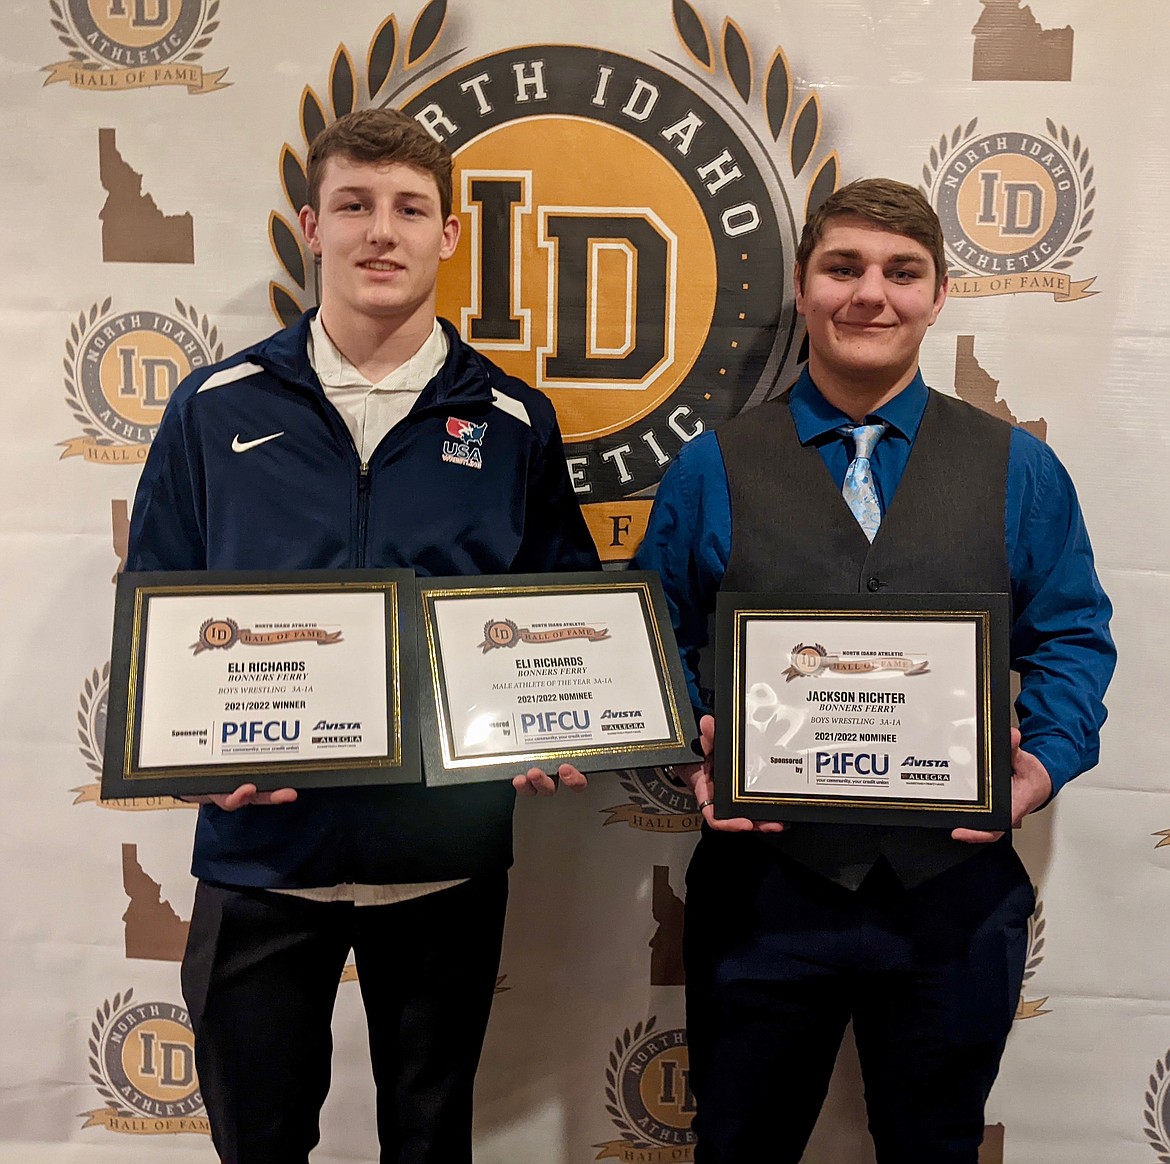 (left to right) Eli Richards and Jackson Rickter receive honors from the North Idaho Hall of Fame. Richards was nominated for best Male Athlete of the Year and North Idaho’s 2021-2022 High School Wrestling Athlete of the Year. Rickter was also nominated for best Wrestling Athlete of the Year.